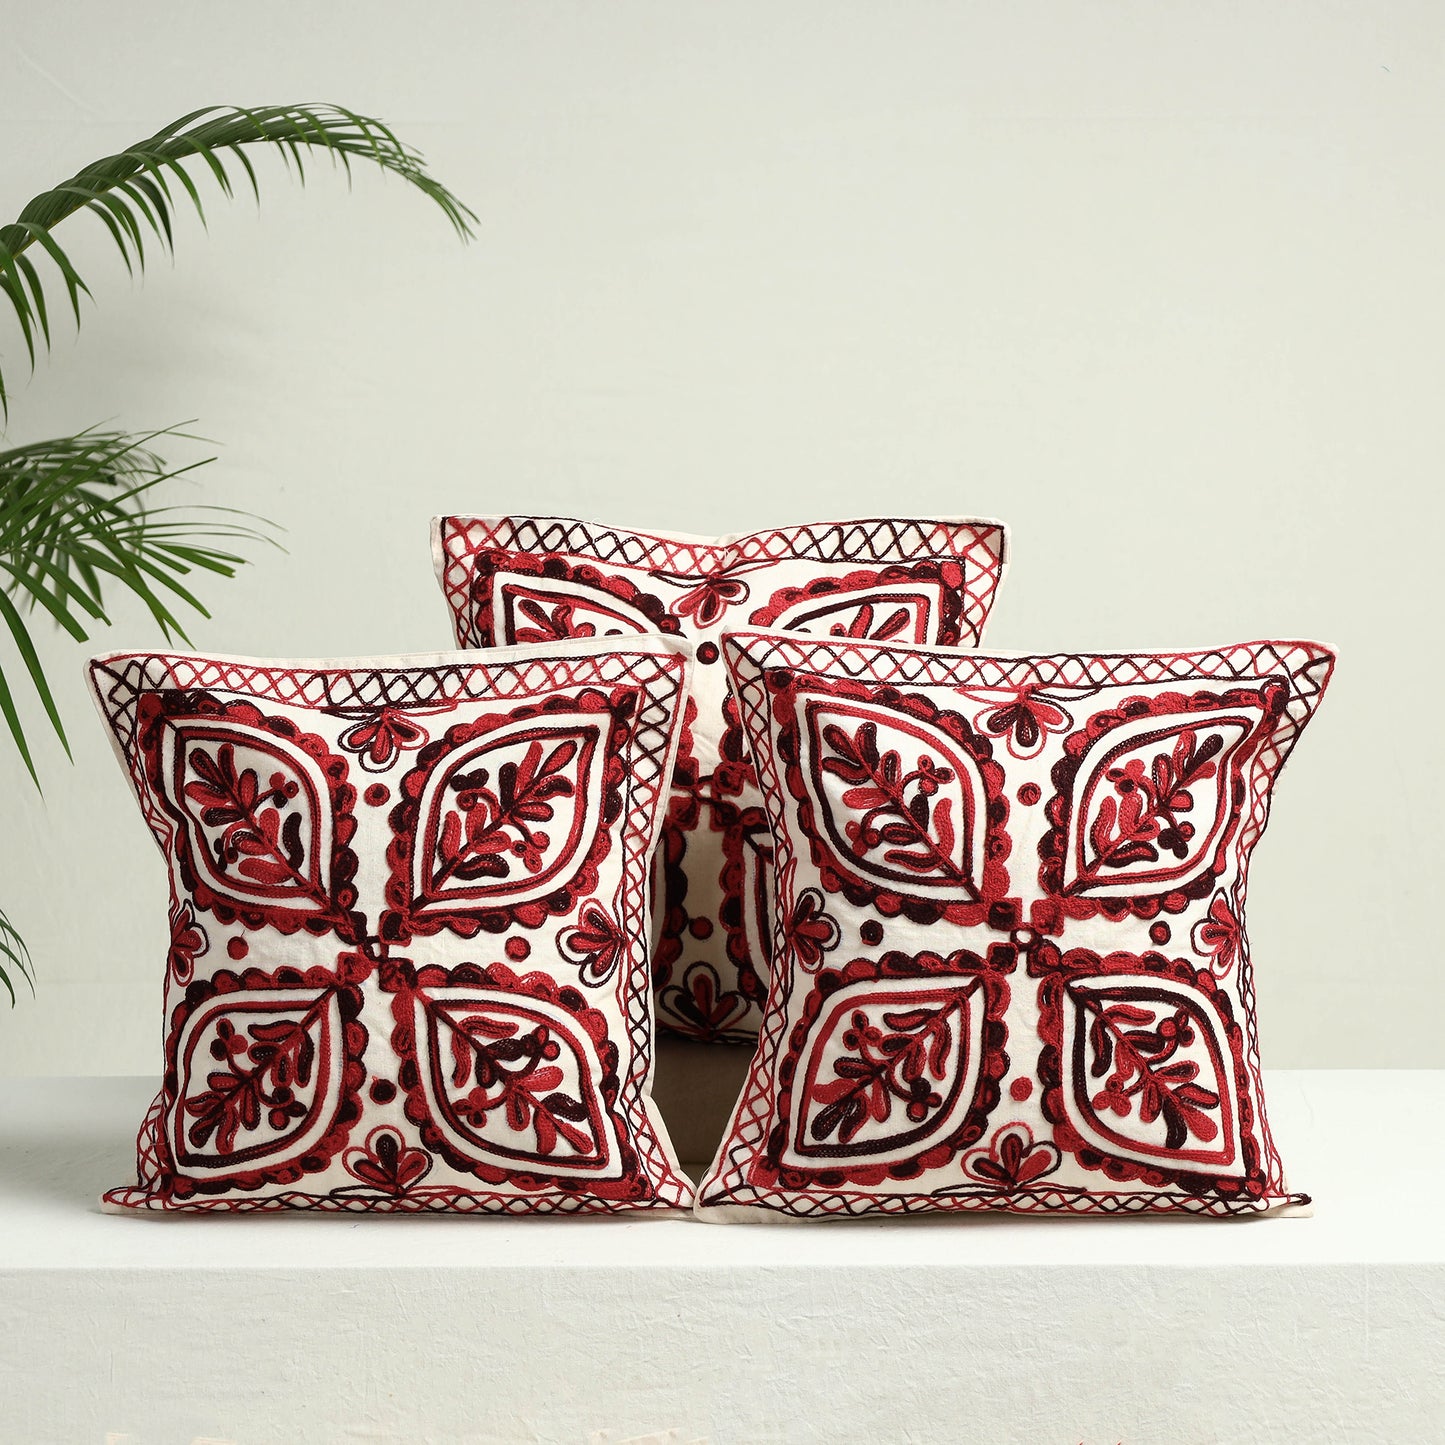 Maroon - Aari Hand Embroidery Cotton Cushion Cover Set of 5 (16 x 16 in)